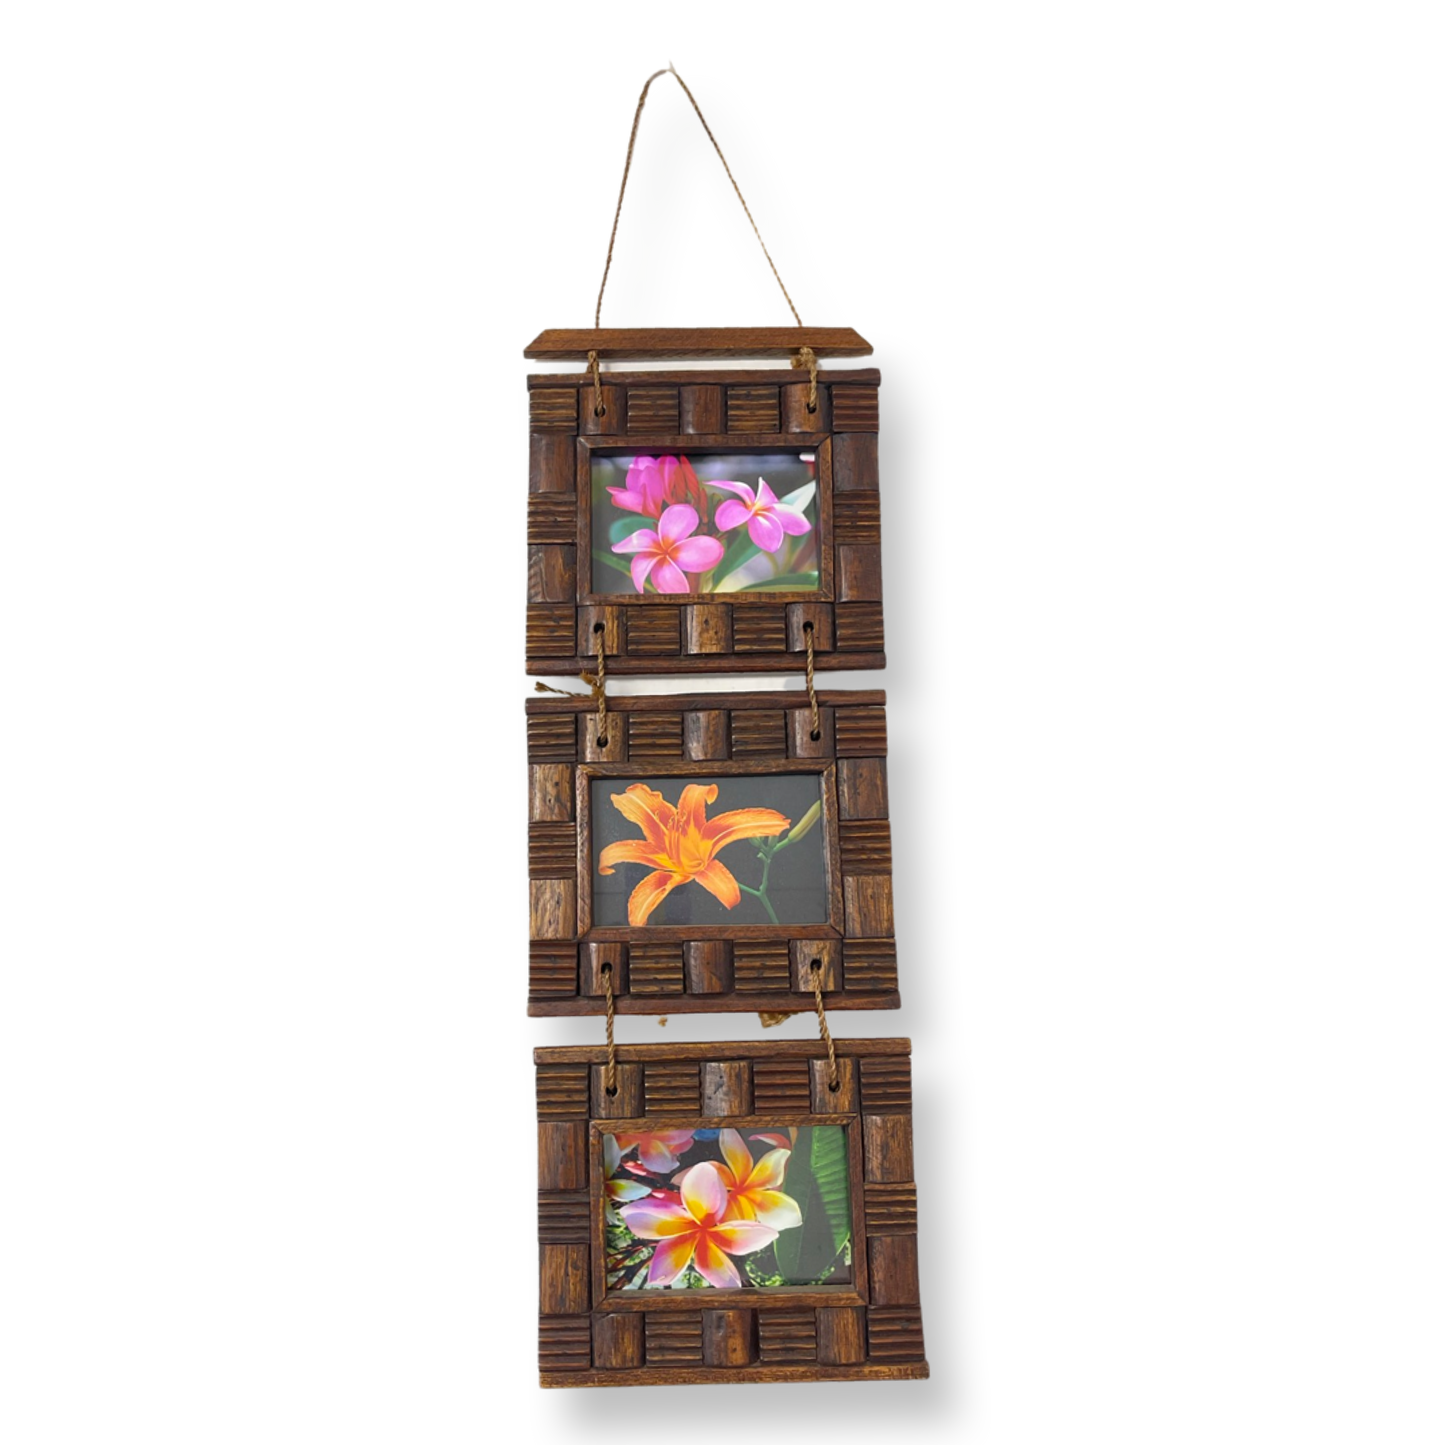 Rustic Triple Hanging Wood Picture Frame